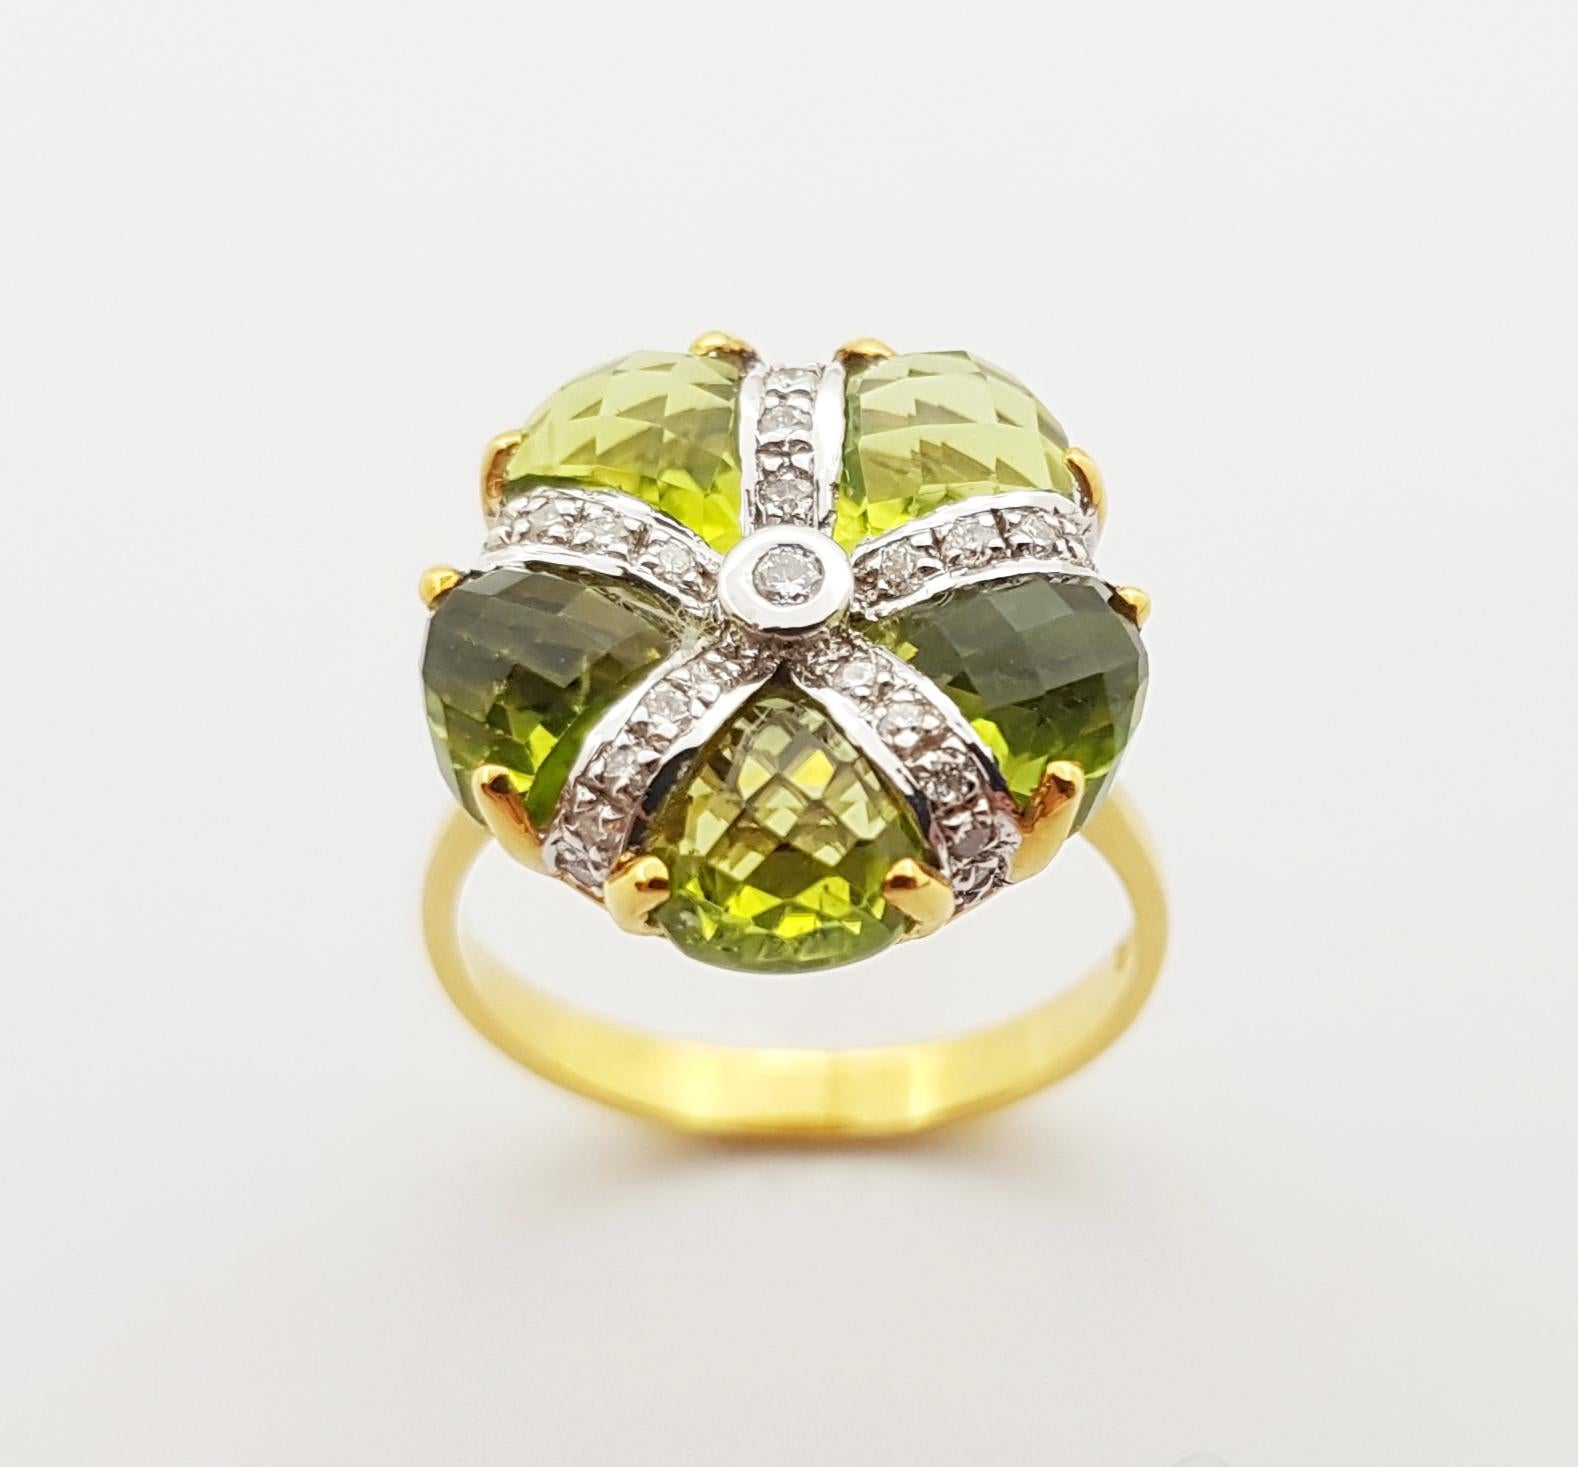 Peridot with Diamond Ring Set in 14 Karat Gold Settings For Sale 2